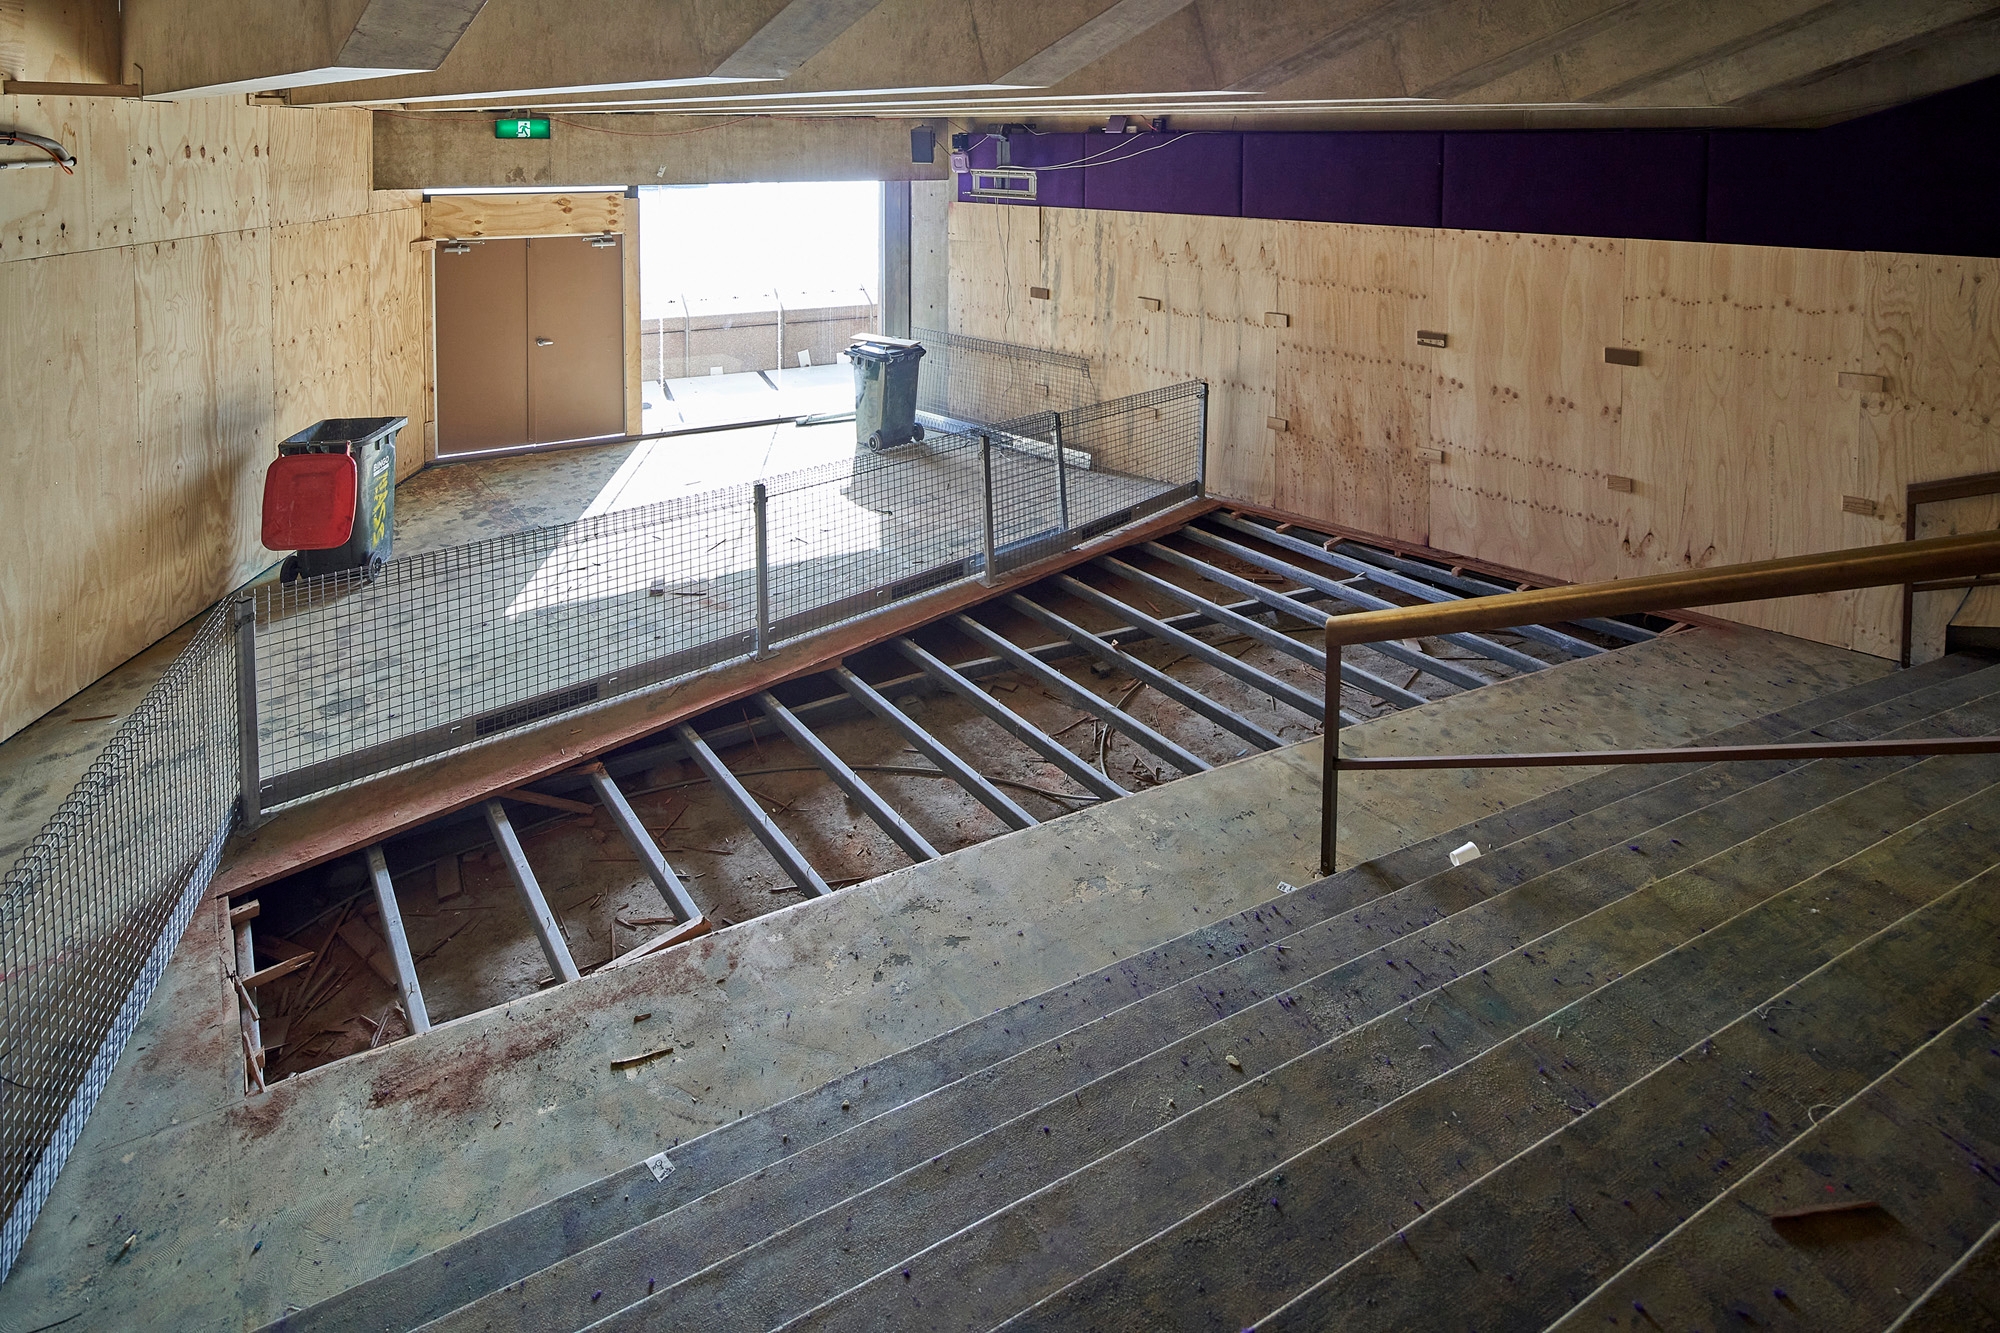 The carpet being stripped from the staircase of the Northern foyer.